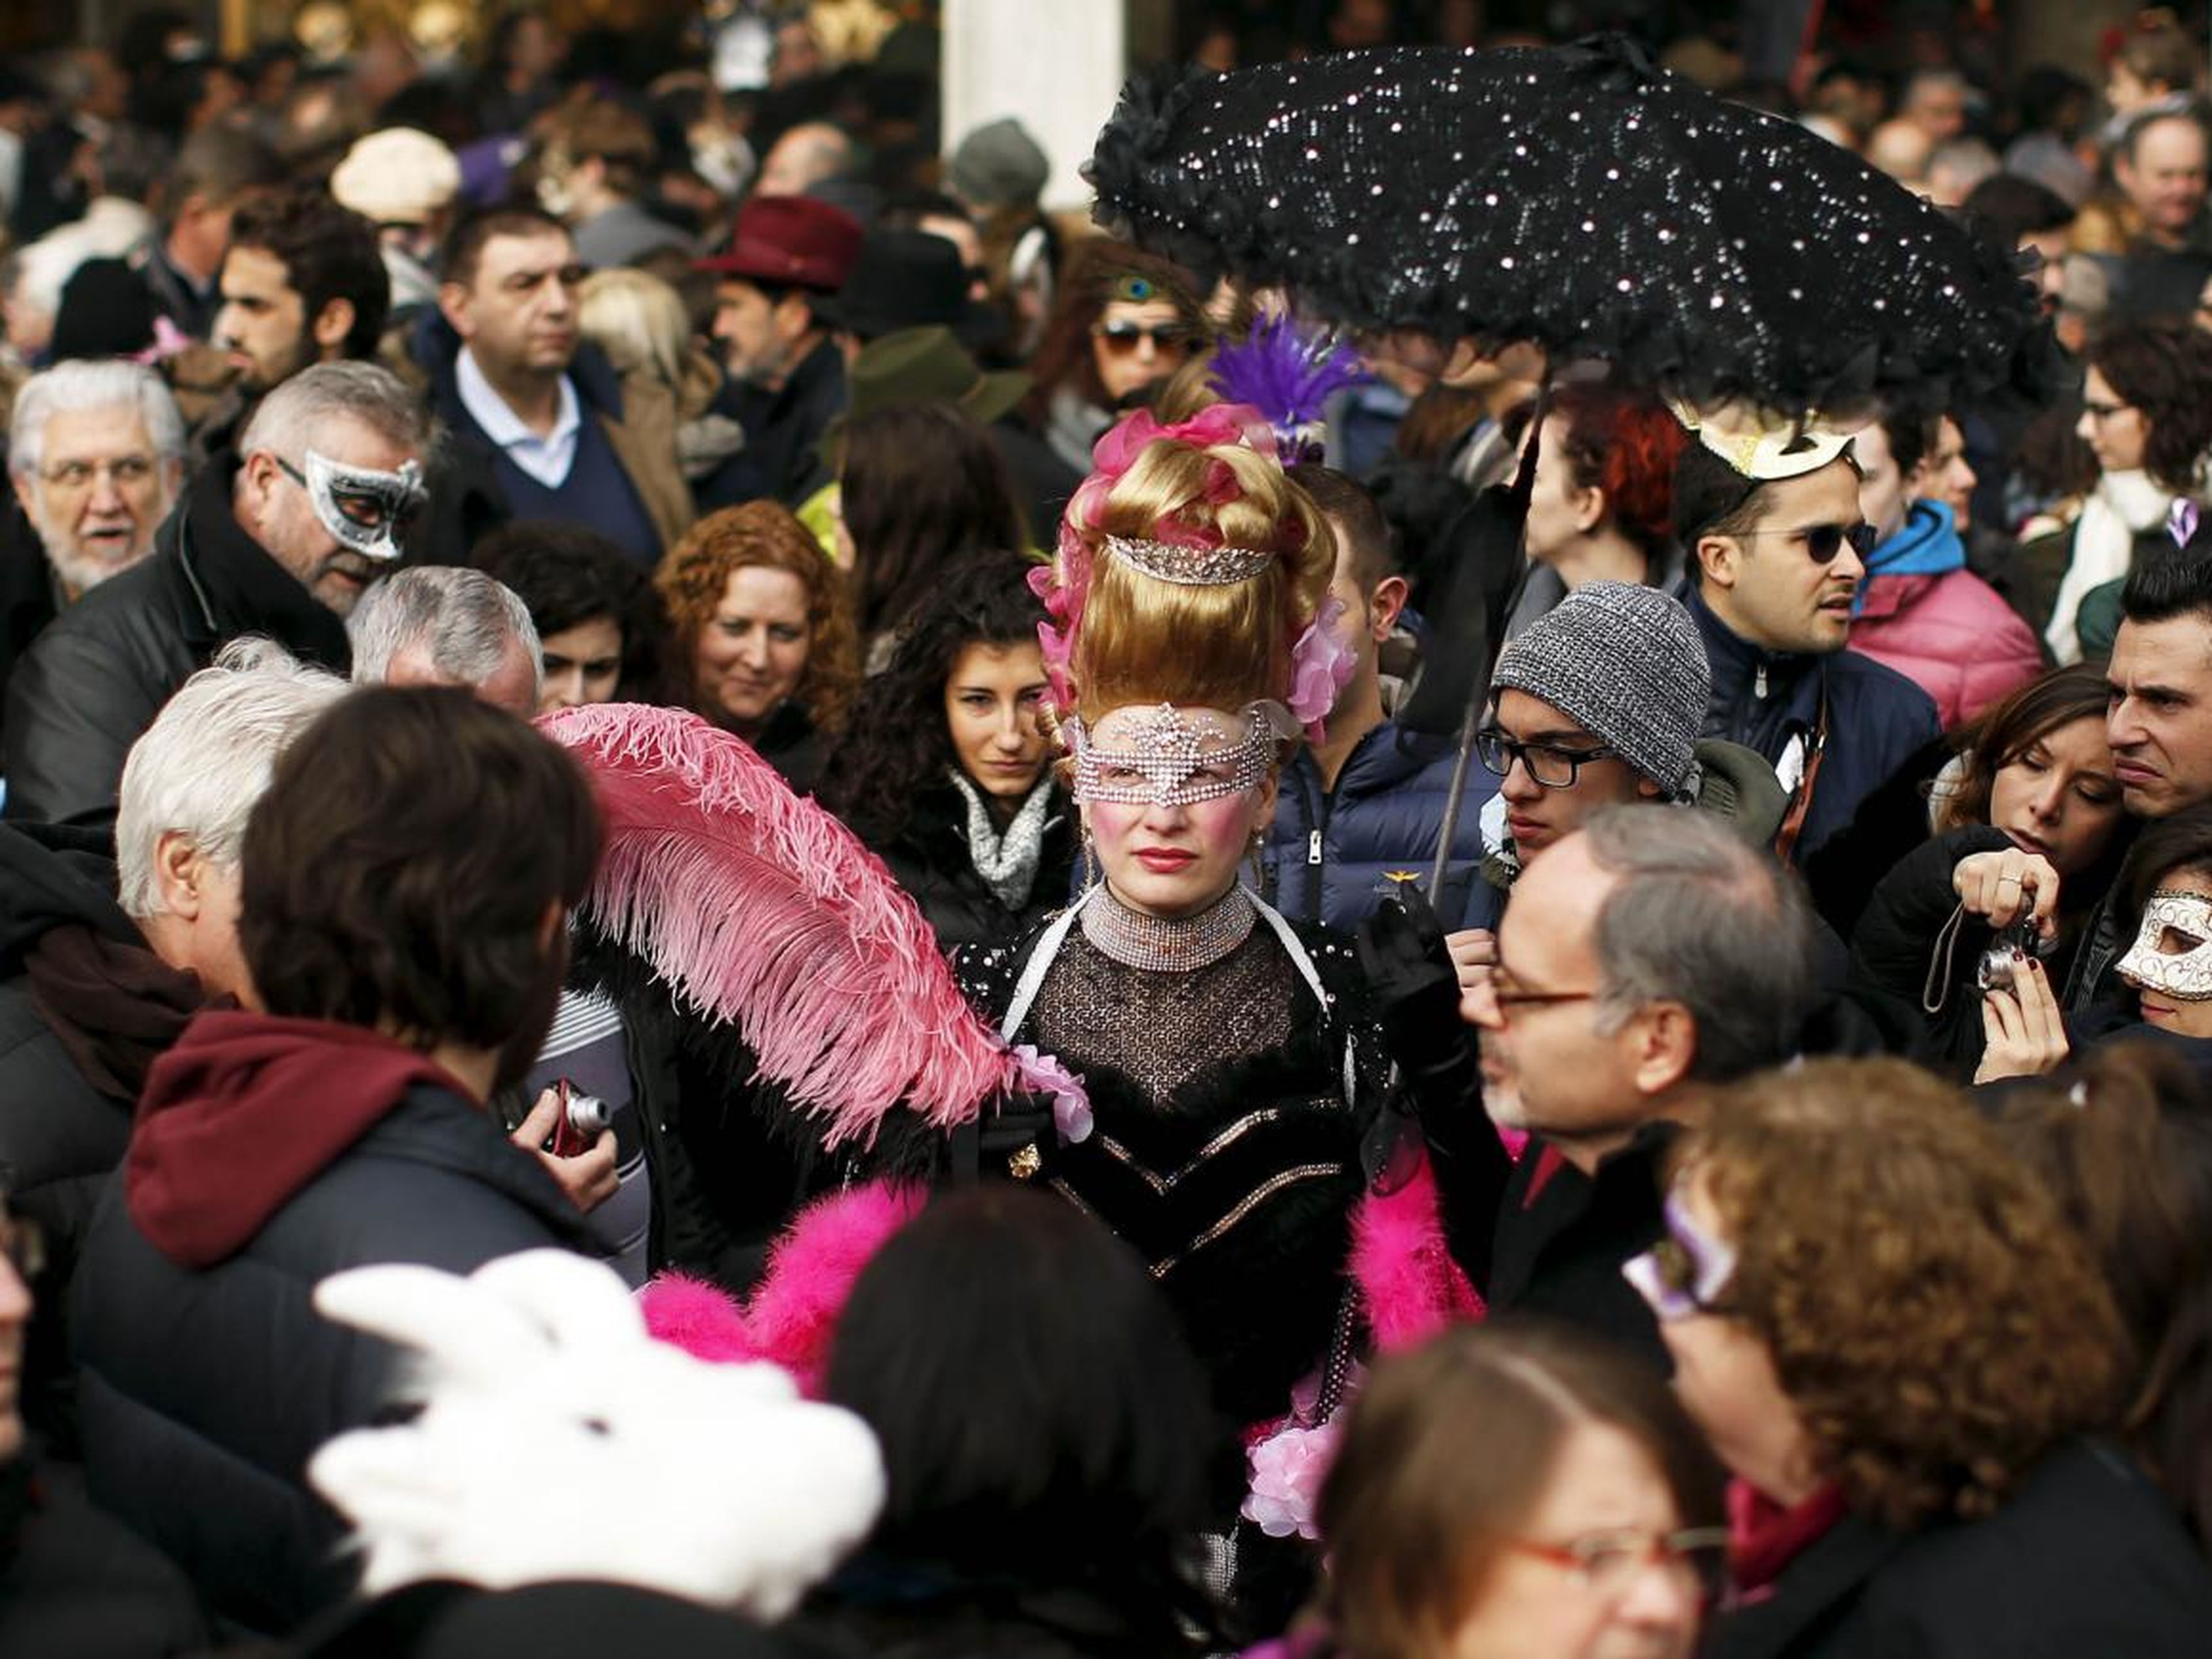 The two-week long event brings thousands of people to the city each year to don masks and costumes and party in the streets.